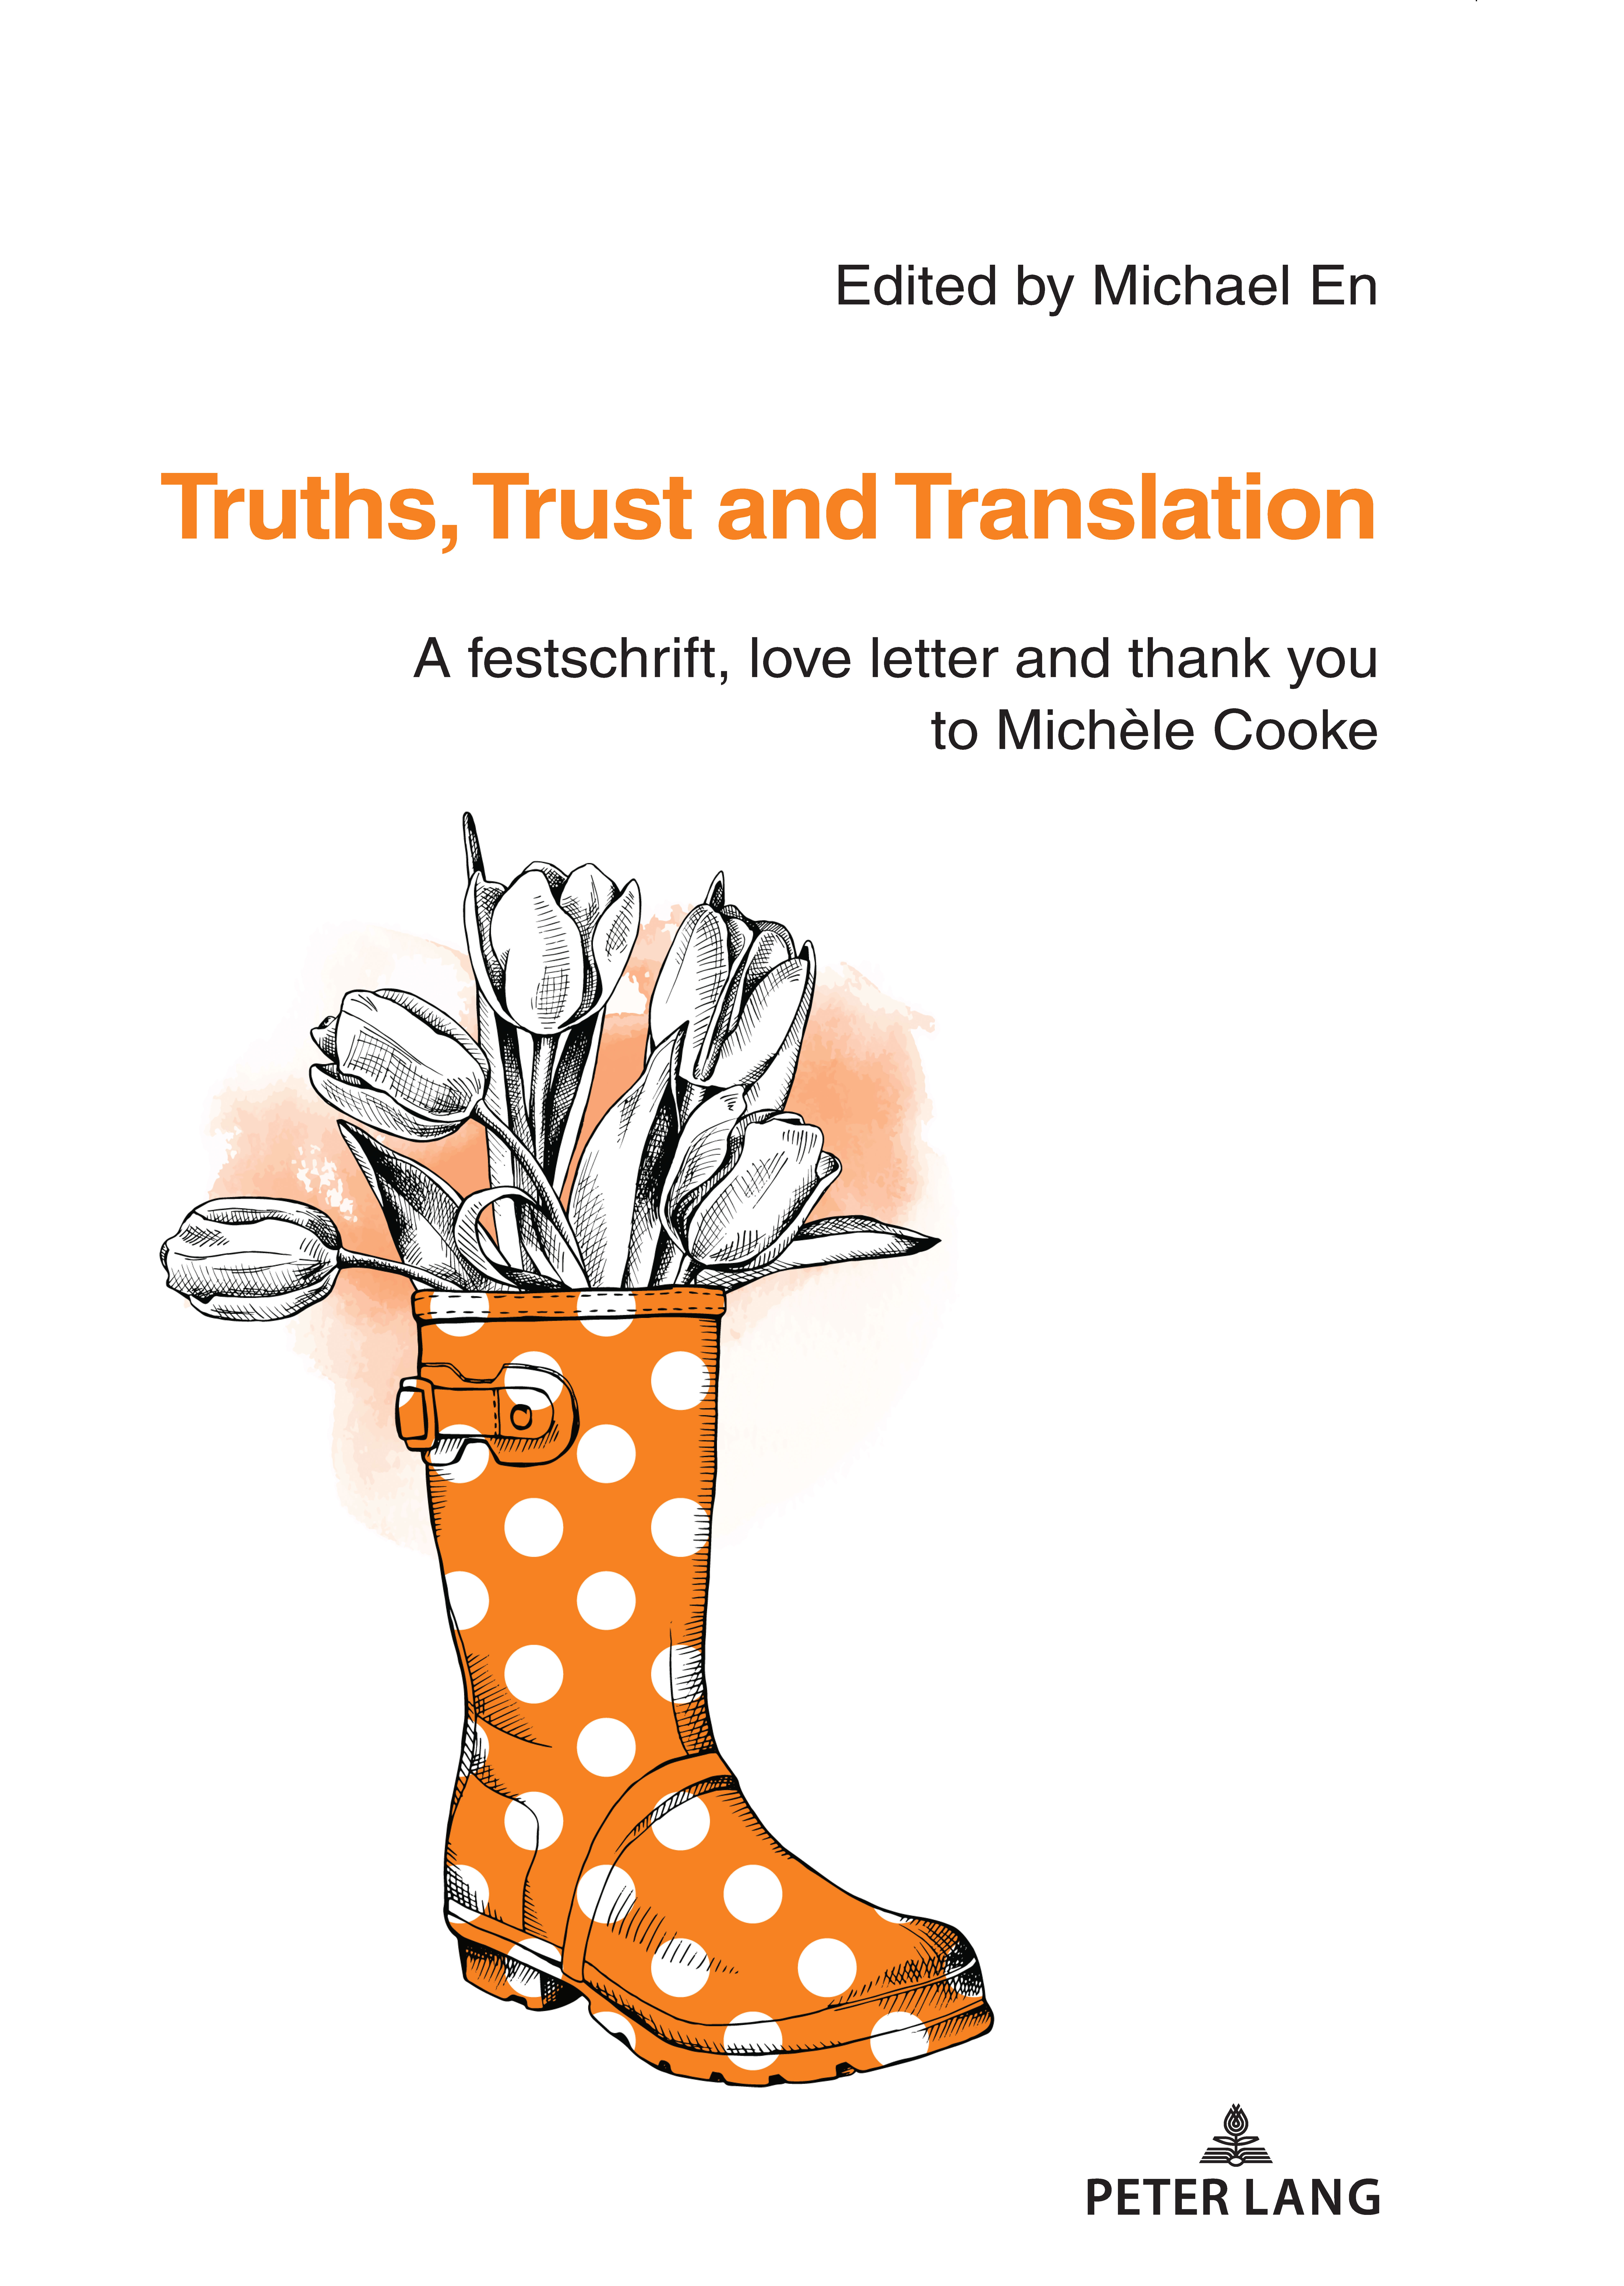 Truths, Trust and Translation: A Festschrift, Love Letter and Thank You to Michèle Cooke